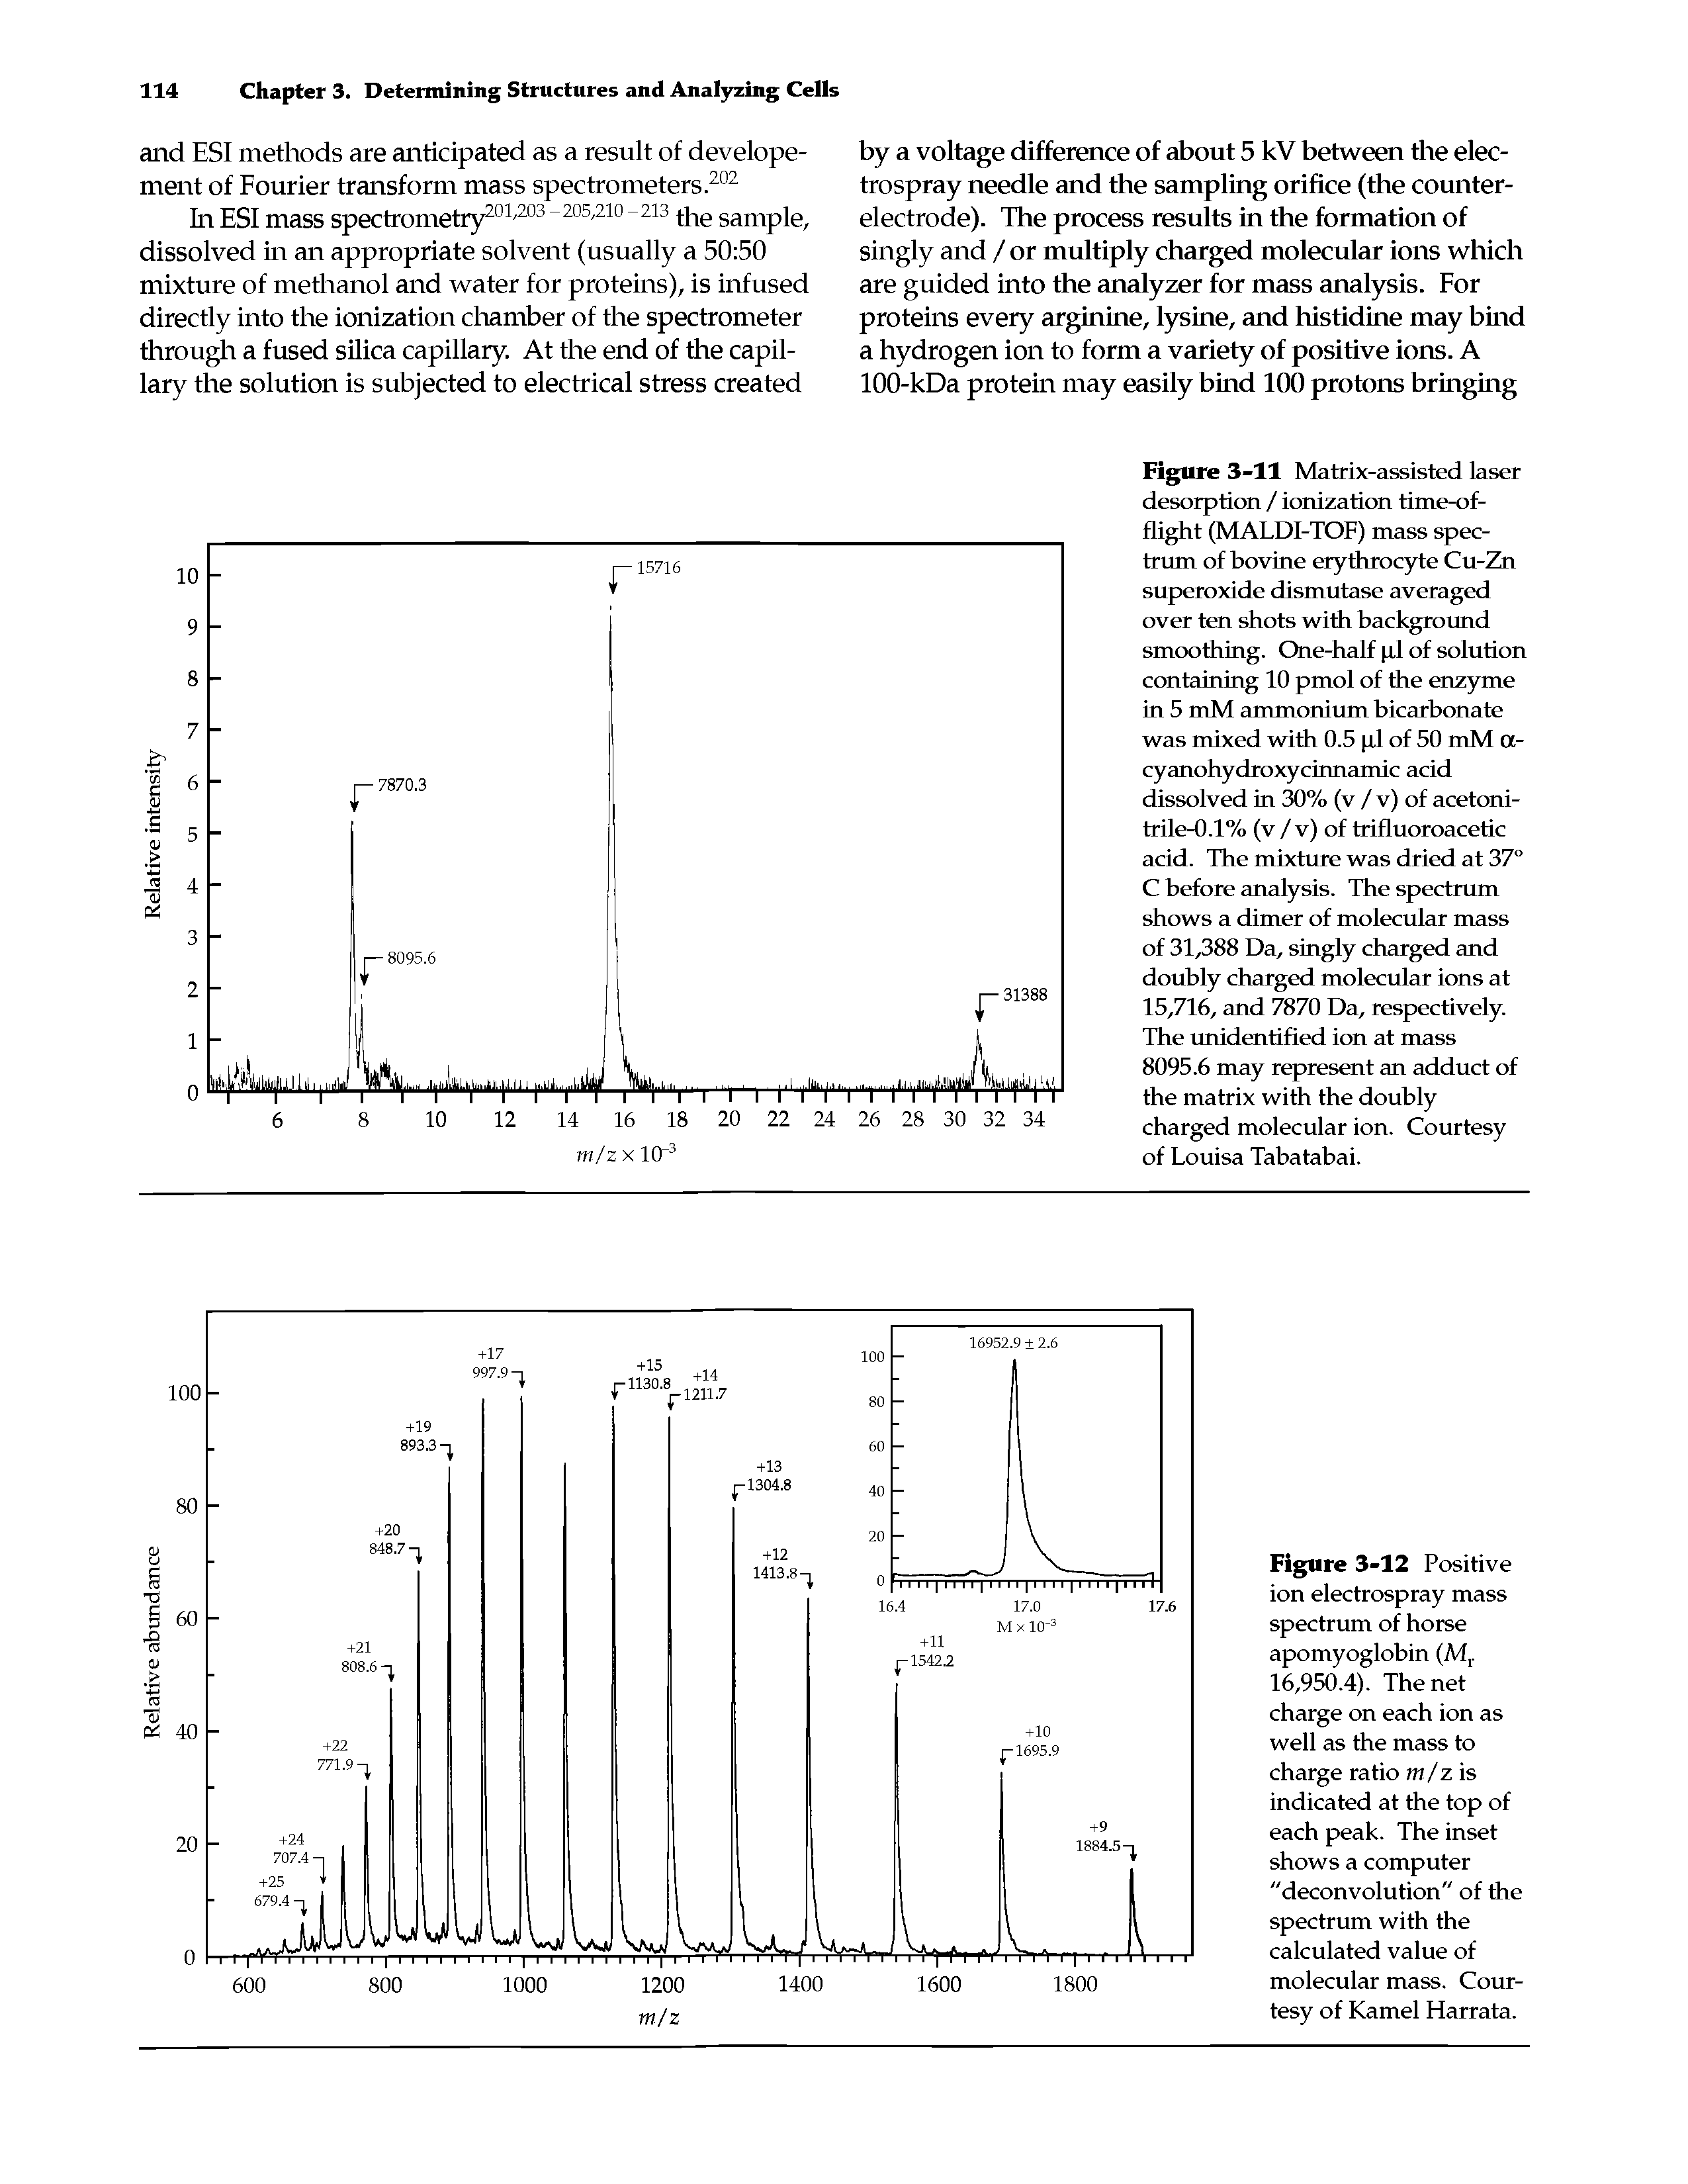 Figure 3-12 Positive ion electrospray mass spectrum of horse apomyoglobin (Mr 16,950.4). The net charge on each ion as well as the mass to charge ratio m/z is indicated at the top of each peak. The inset shows a computer "deconvolution" of the spectrum with the calculated value of molecular mass. Courtesy of Kamel Harrata.